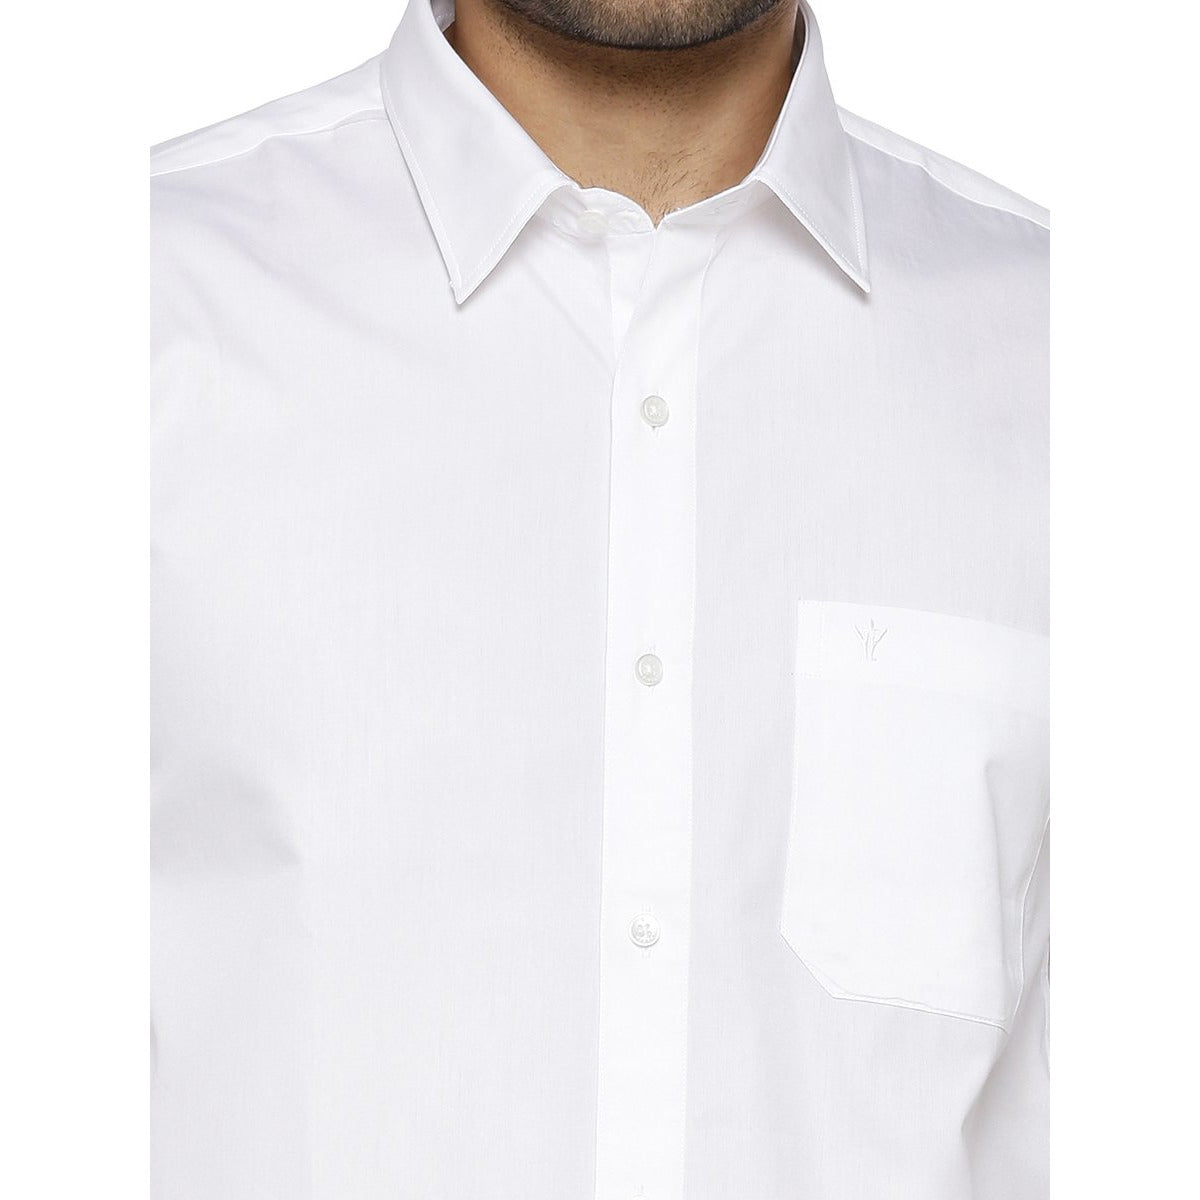 Mens Cotton White Shirt Full Sleeves Royal Cotton-Zoom view